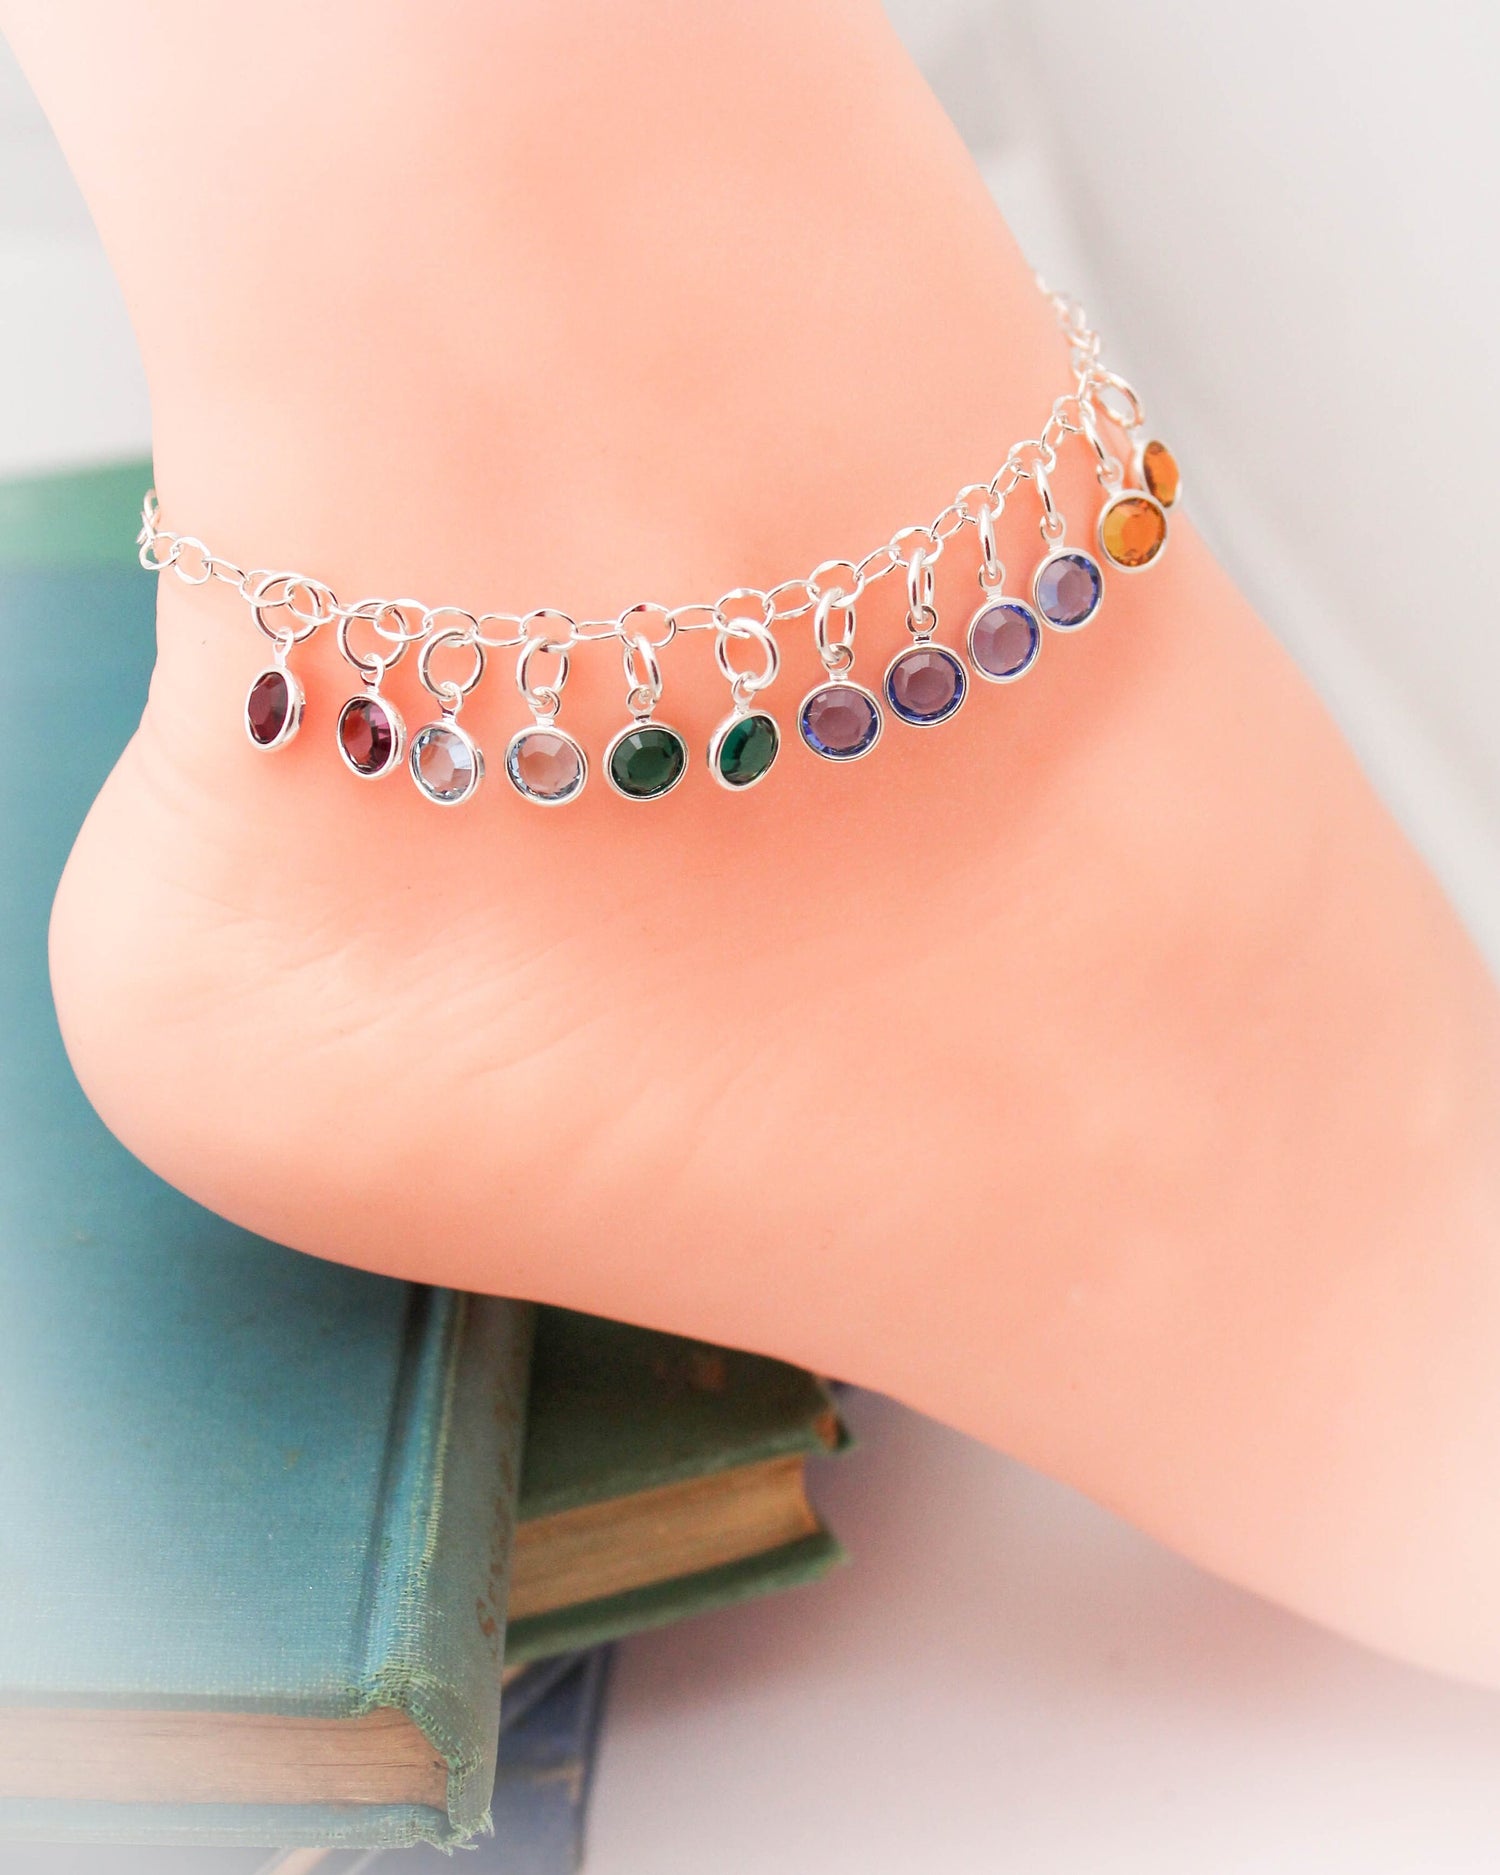 Personalized Birthstone Anklet, Crystal Birthstone Anklet, Mom Anklet with Children's Birthstones, Mother's Anklet, Mother's Day Gift